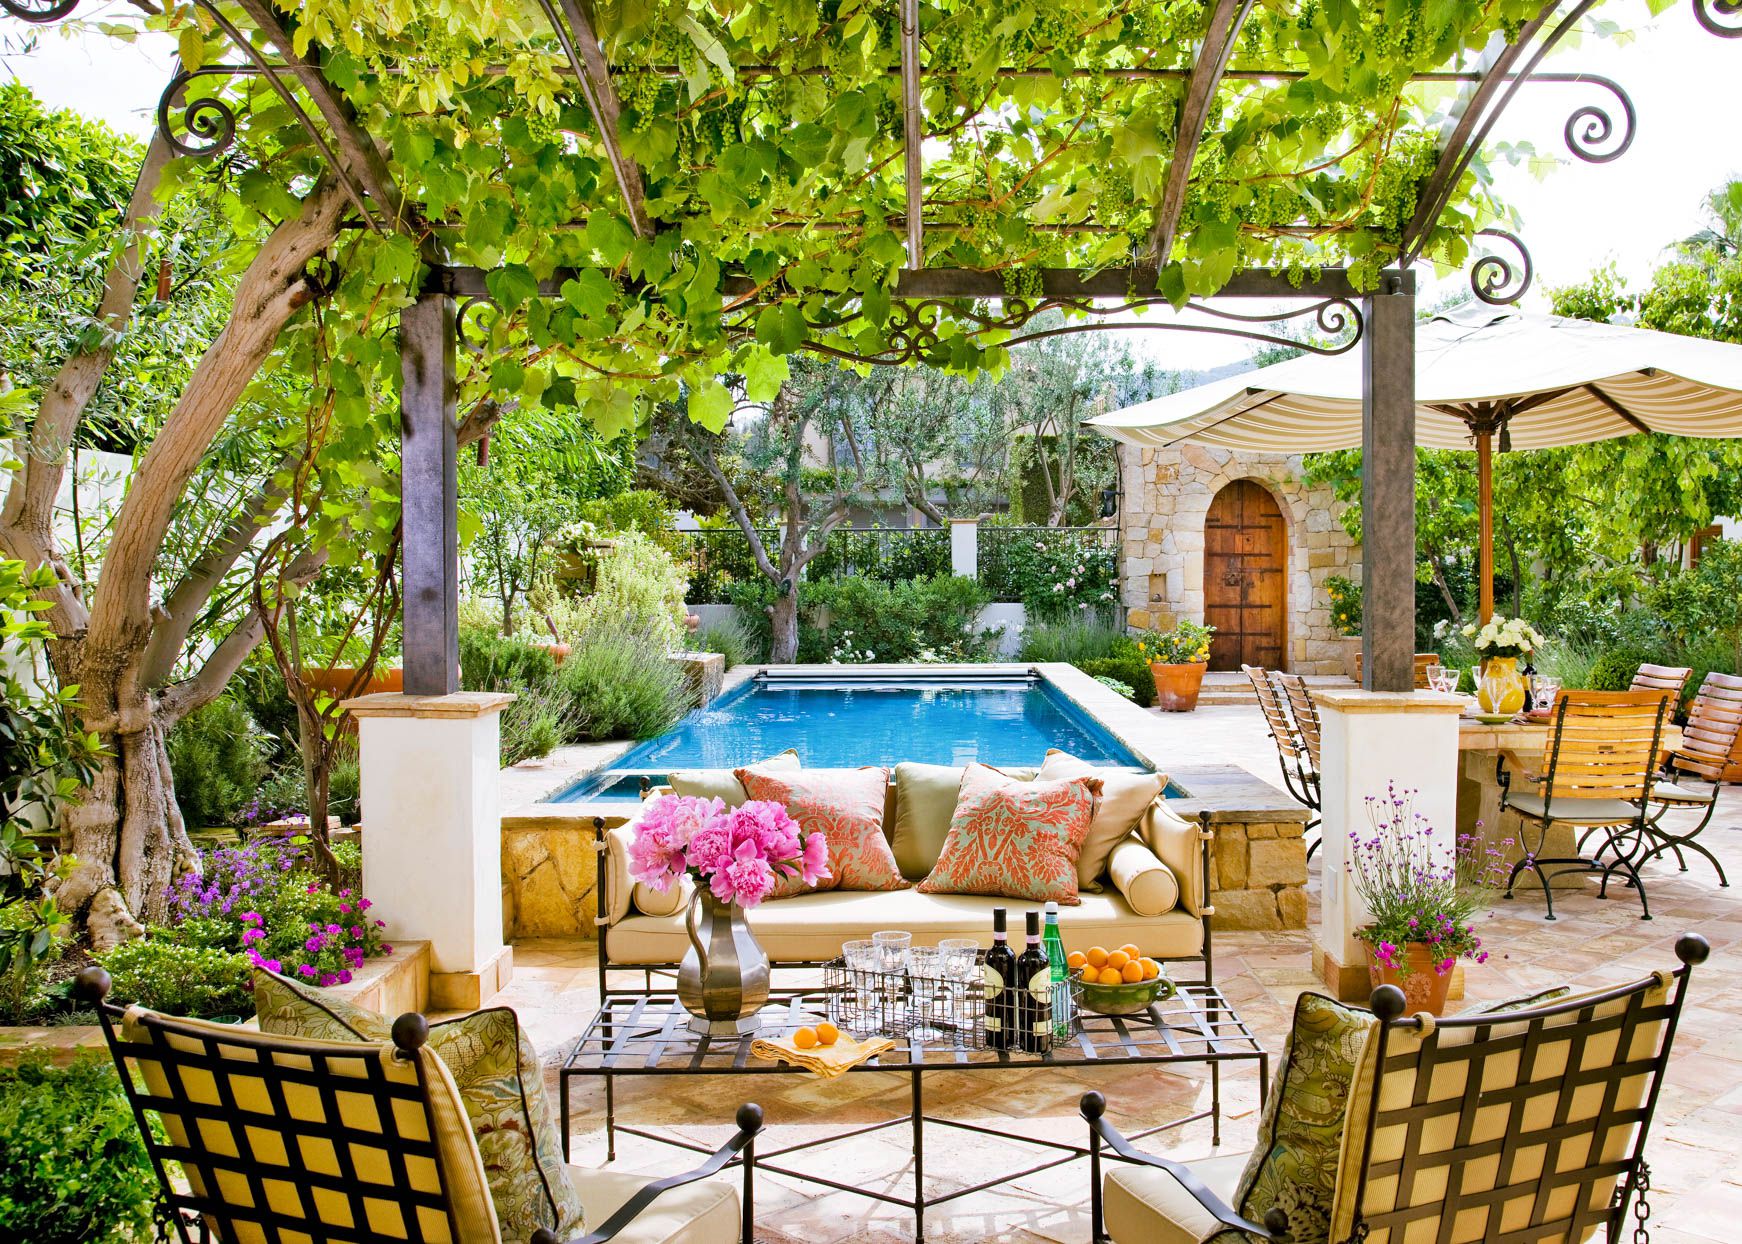 Guide to Crafting an Outdoor Living Oasis